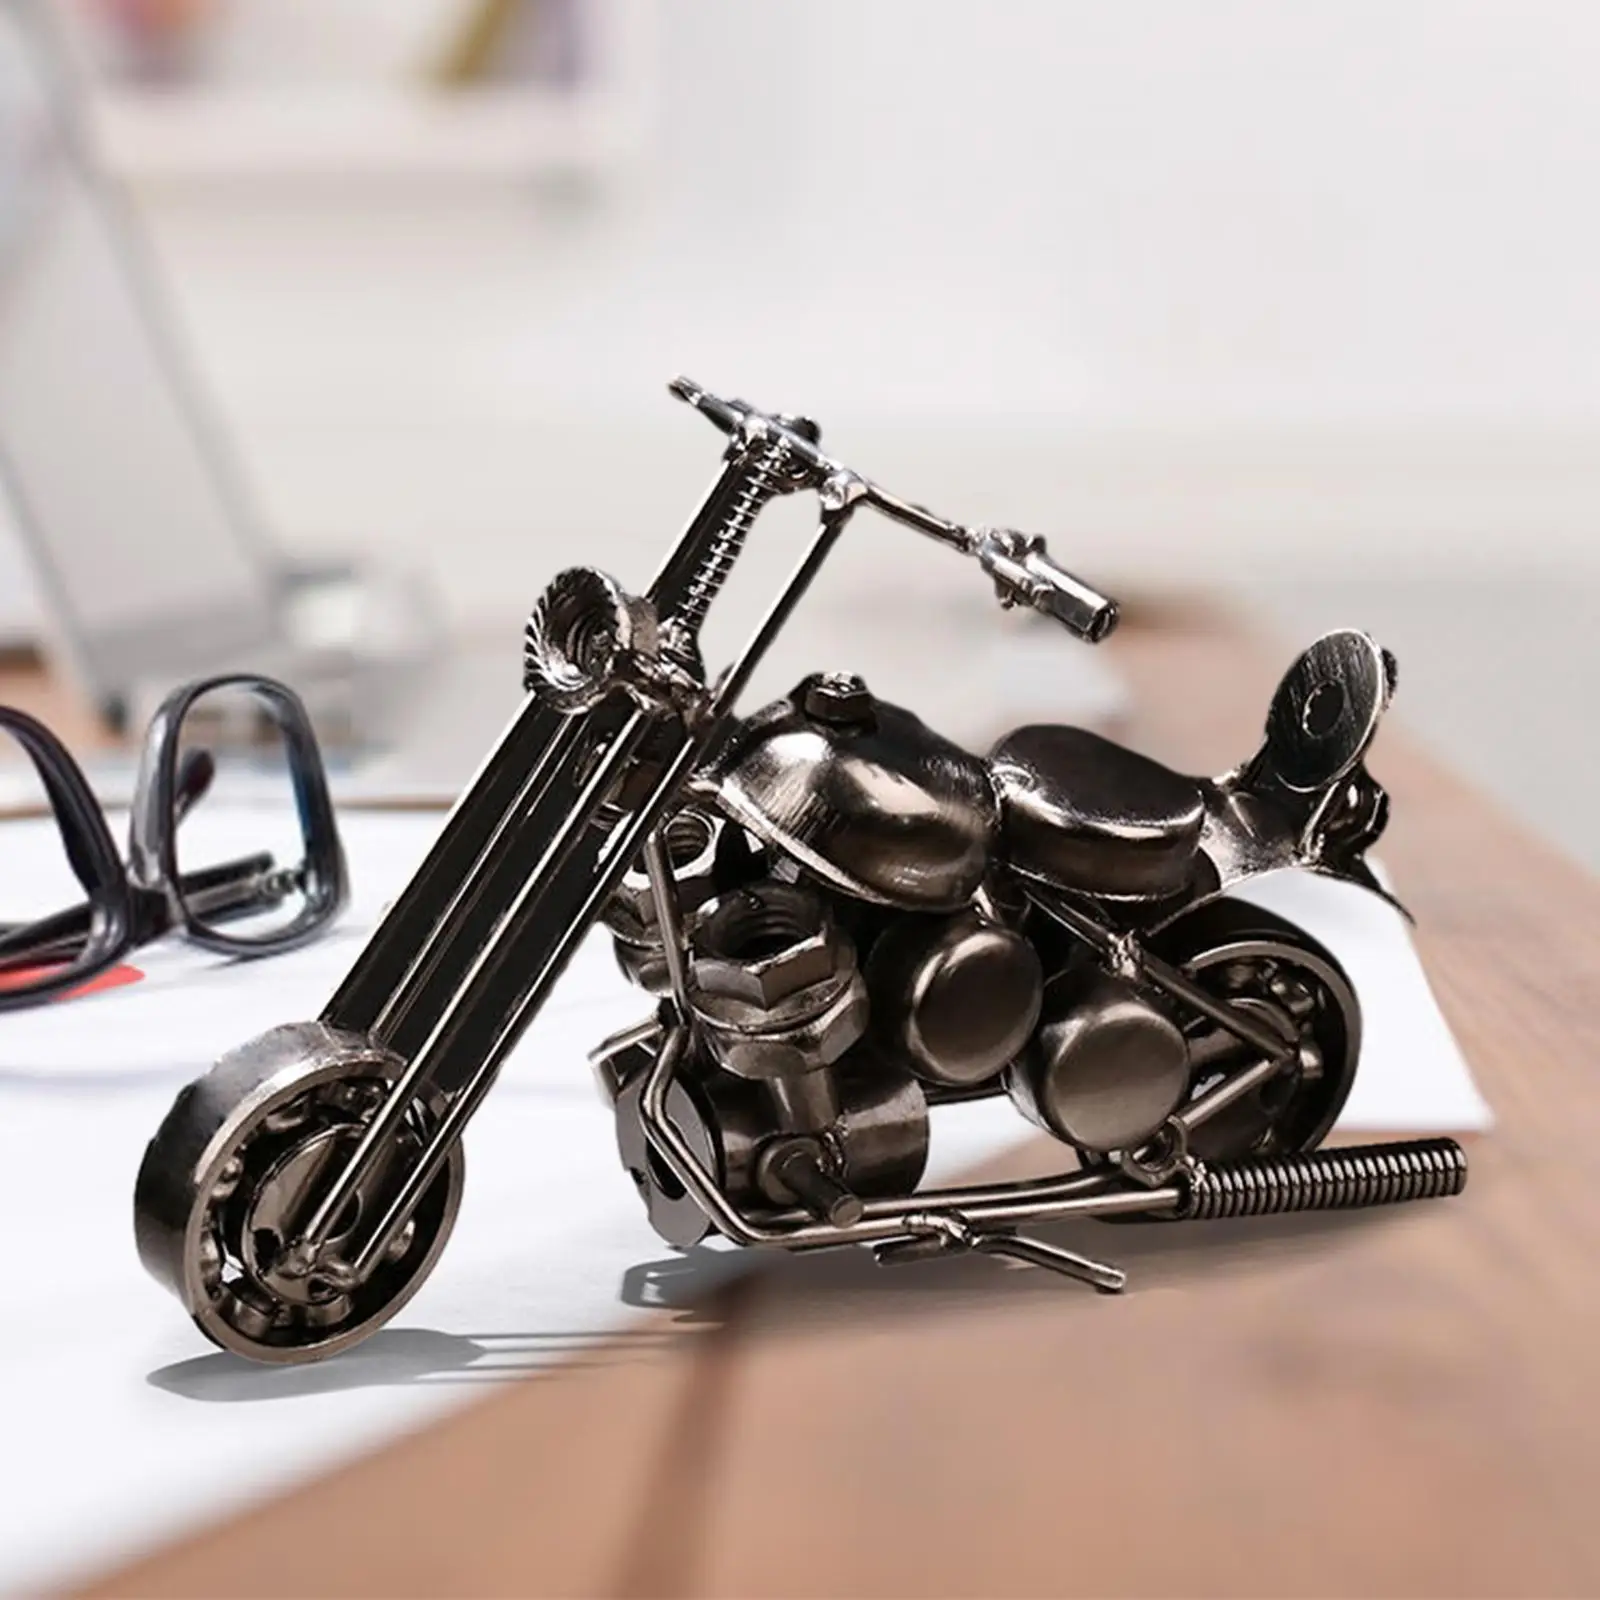 Metal Motorcycle Model Motorcycle Sculpture Birthday Gift Collection for Bookshelf Home Desktop Office Motorcycle Lovers